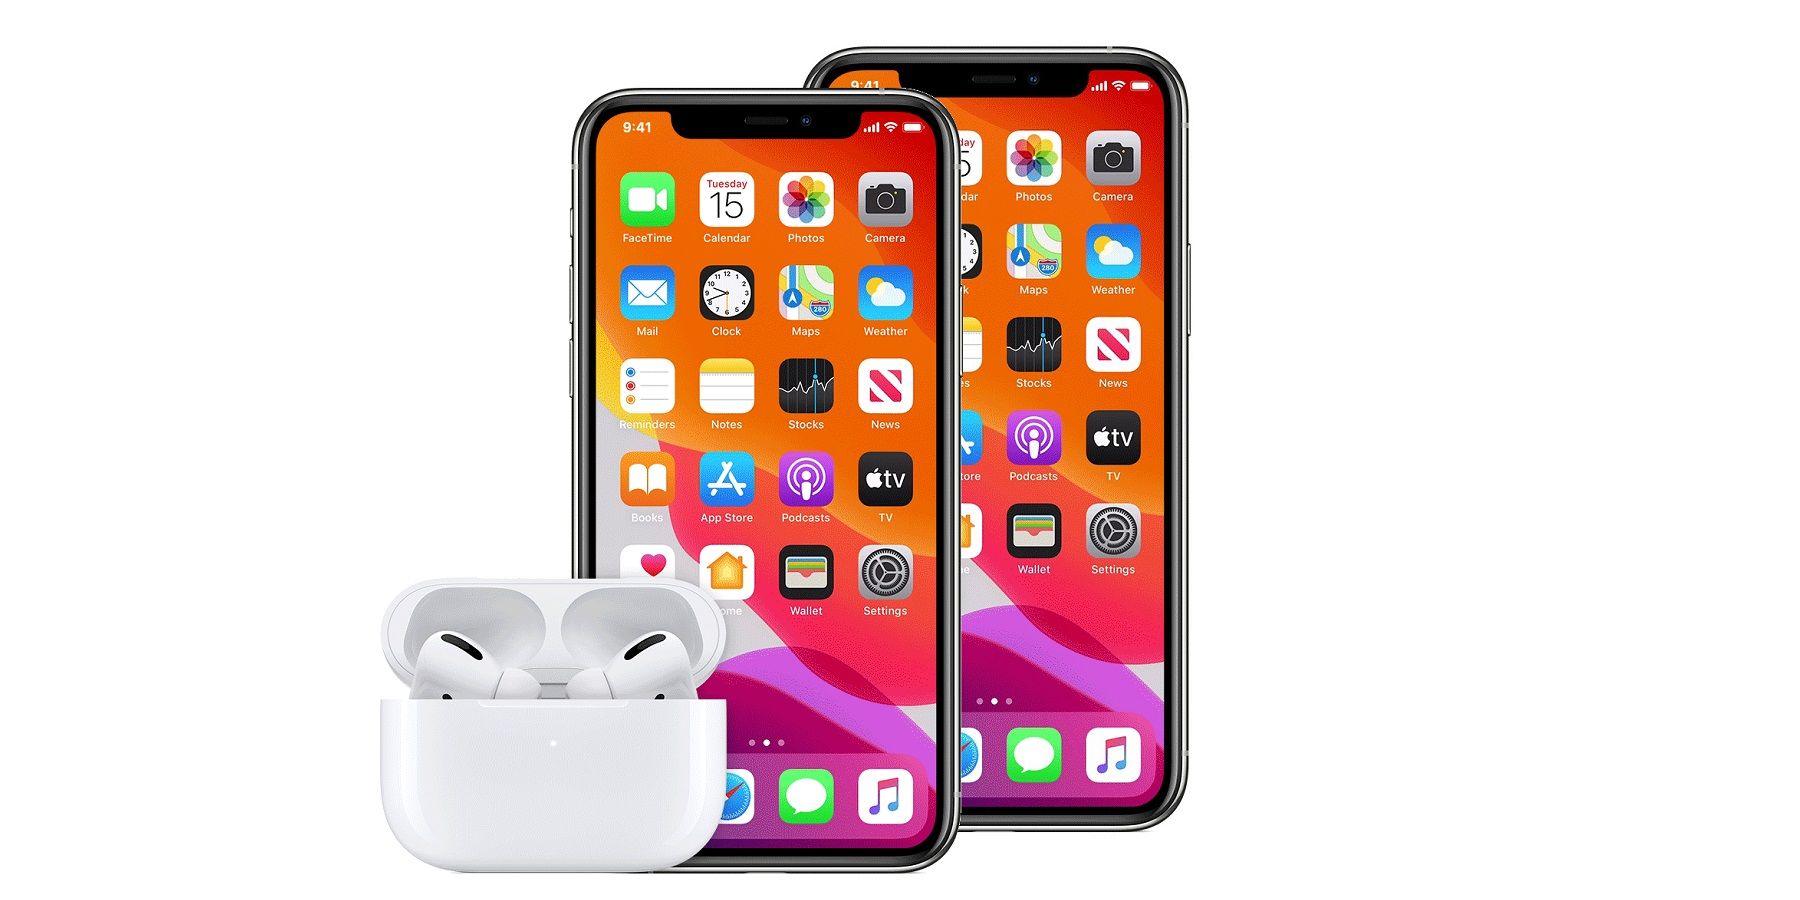 Can AirPods Be Connected To Two Devices At The Same Time